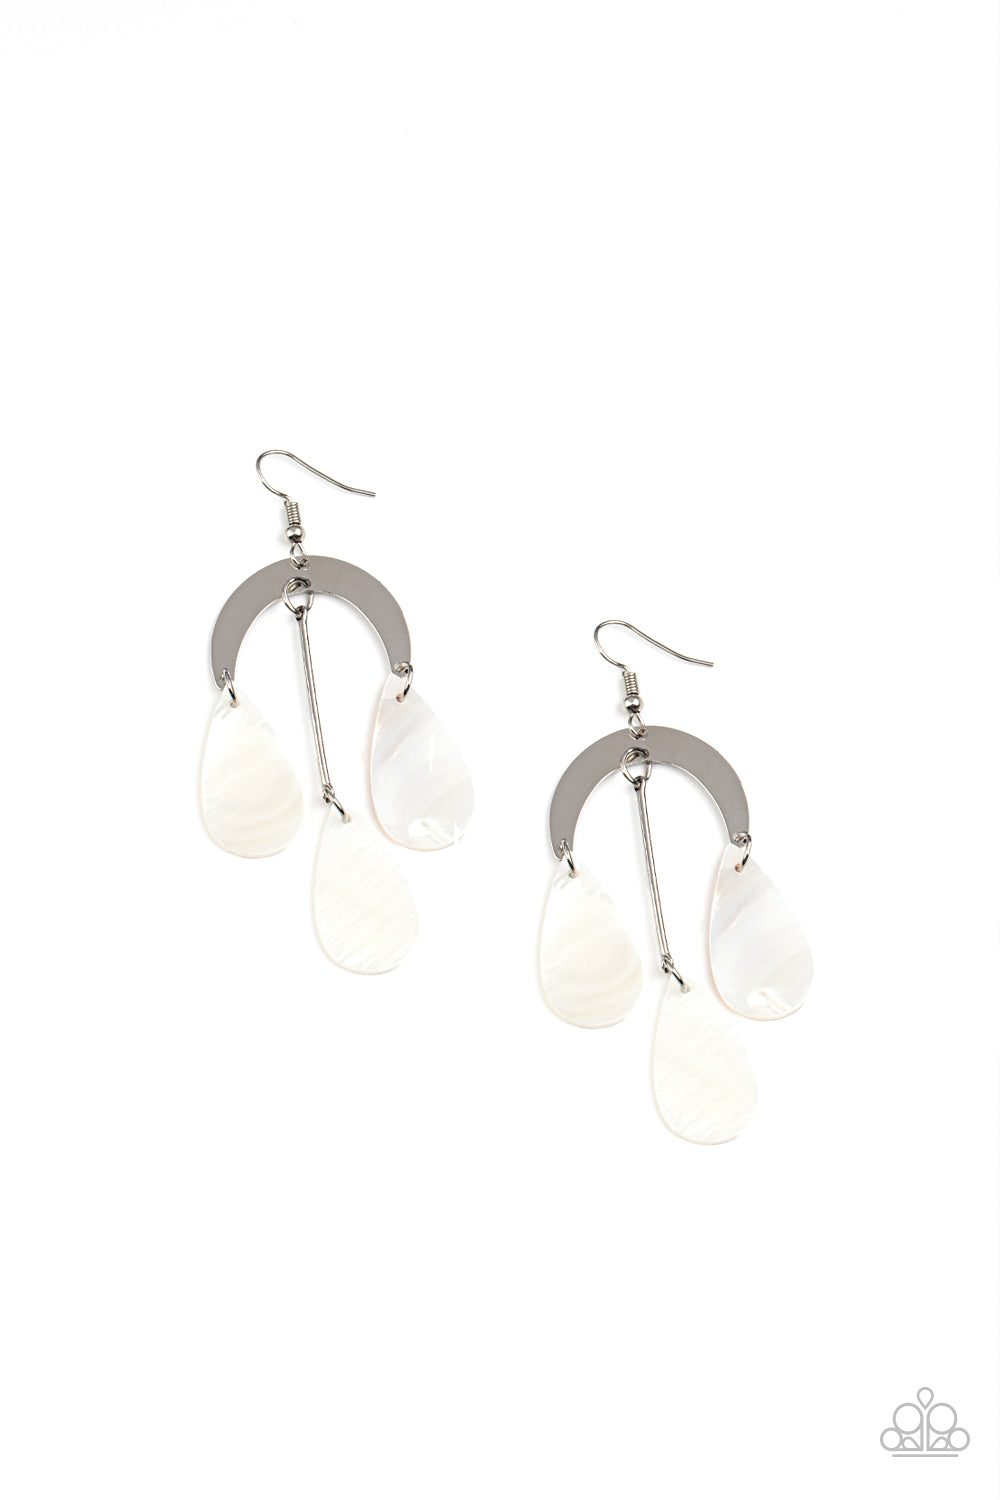 Atlantis Ambience - White and Silver Fashion Earrings - Paparazzi Accessories - White shell-like teardrops trickle from the bottom of a silver rod and silver half moon frame, creating an ocean inspired chandelier. Earring attaches to a standard fishhook fitting.